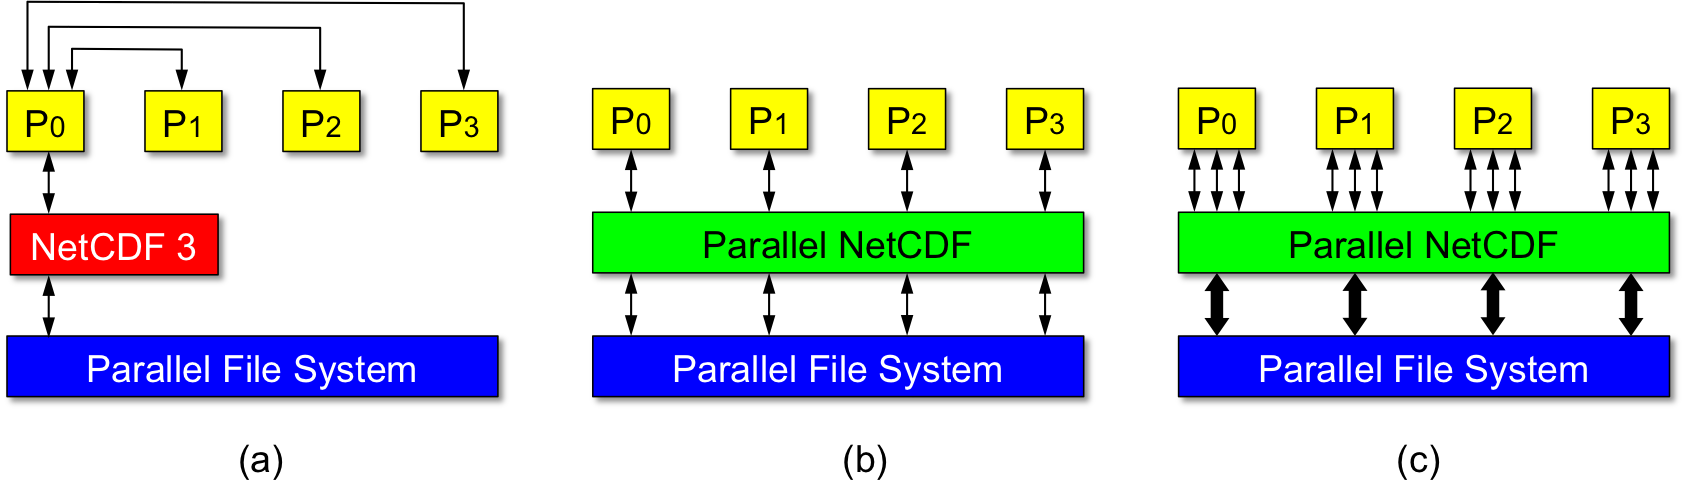 PnetCDF figure comparing sequential I/O, parallel I/O, and parallel I/O with request aggregation feature.